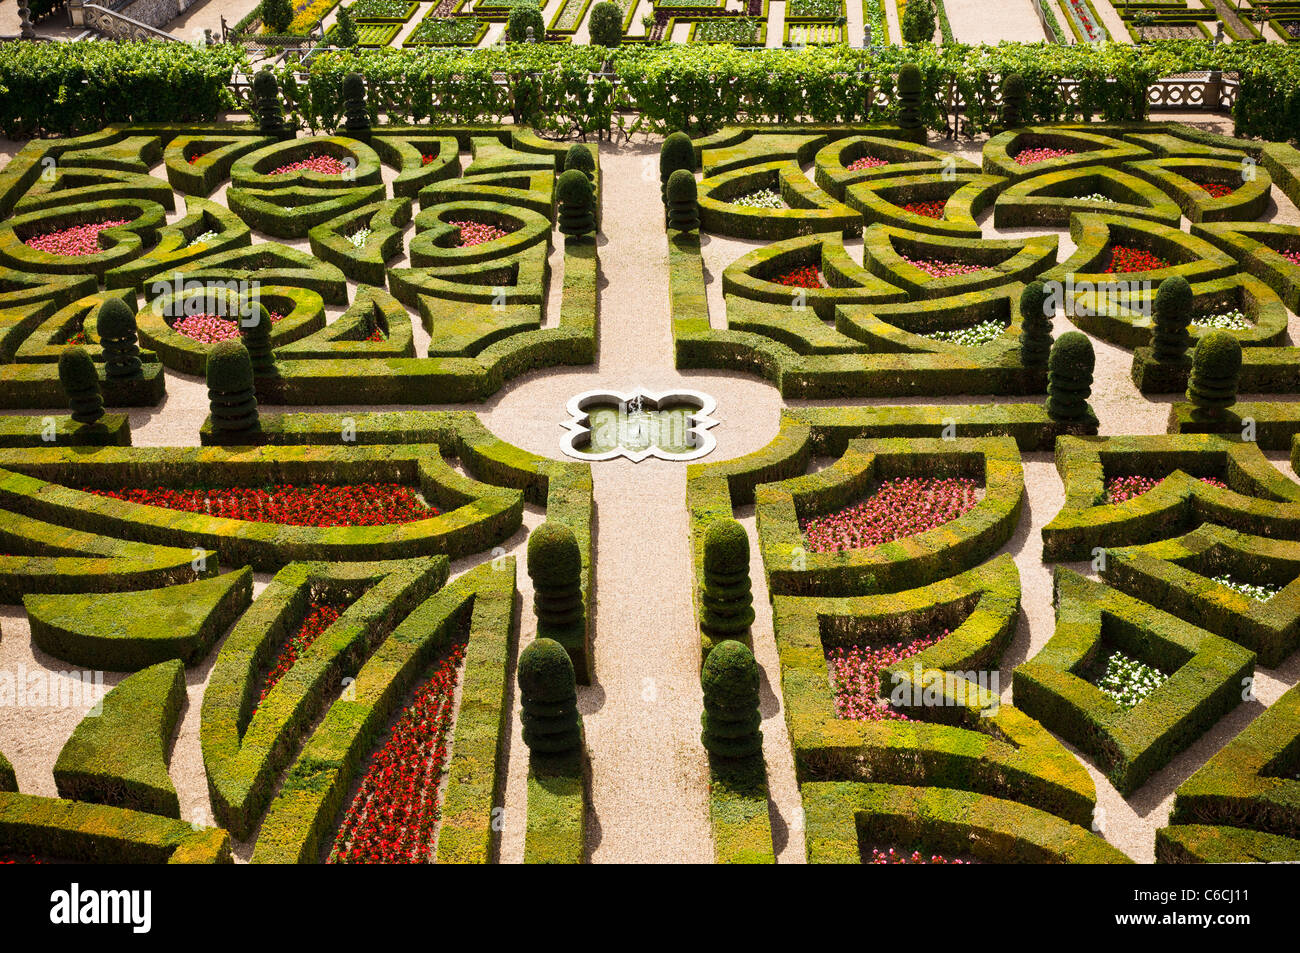 The Love Gardens at Chateau Villandry, Indre et Loire, Loire Valley, France, Europe Stock Photo